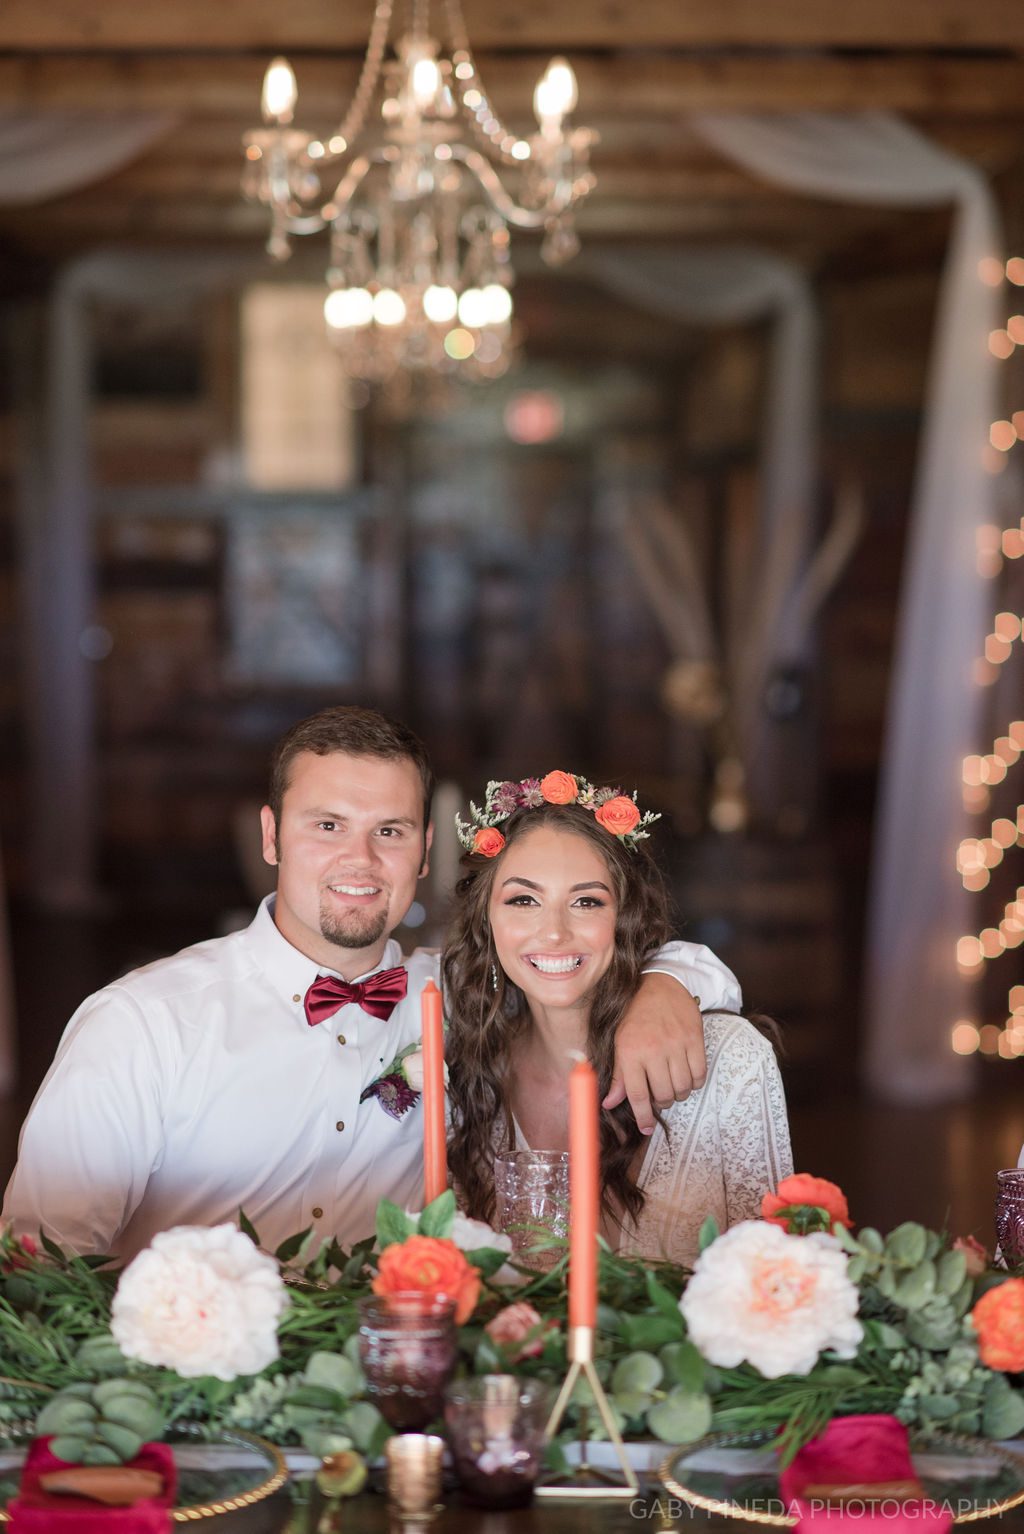 Bride wearing floral crown and groom wearing crimson bowtie sitting at sweetheart table